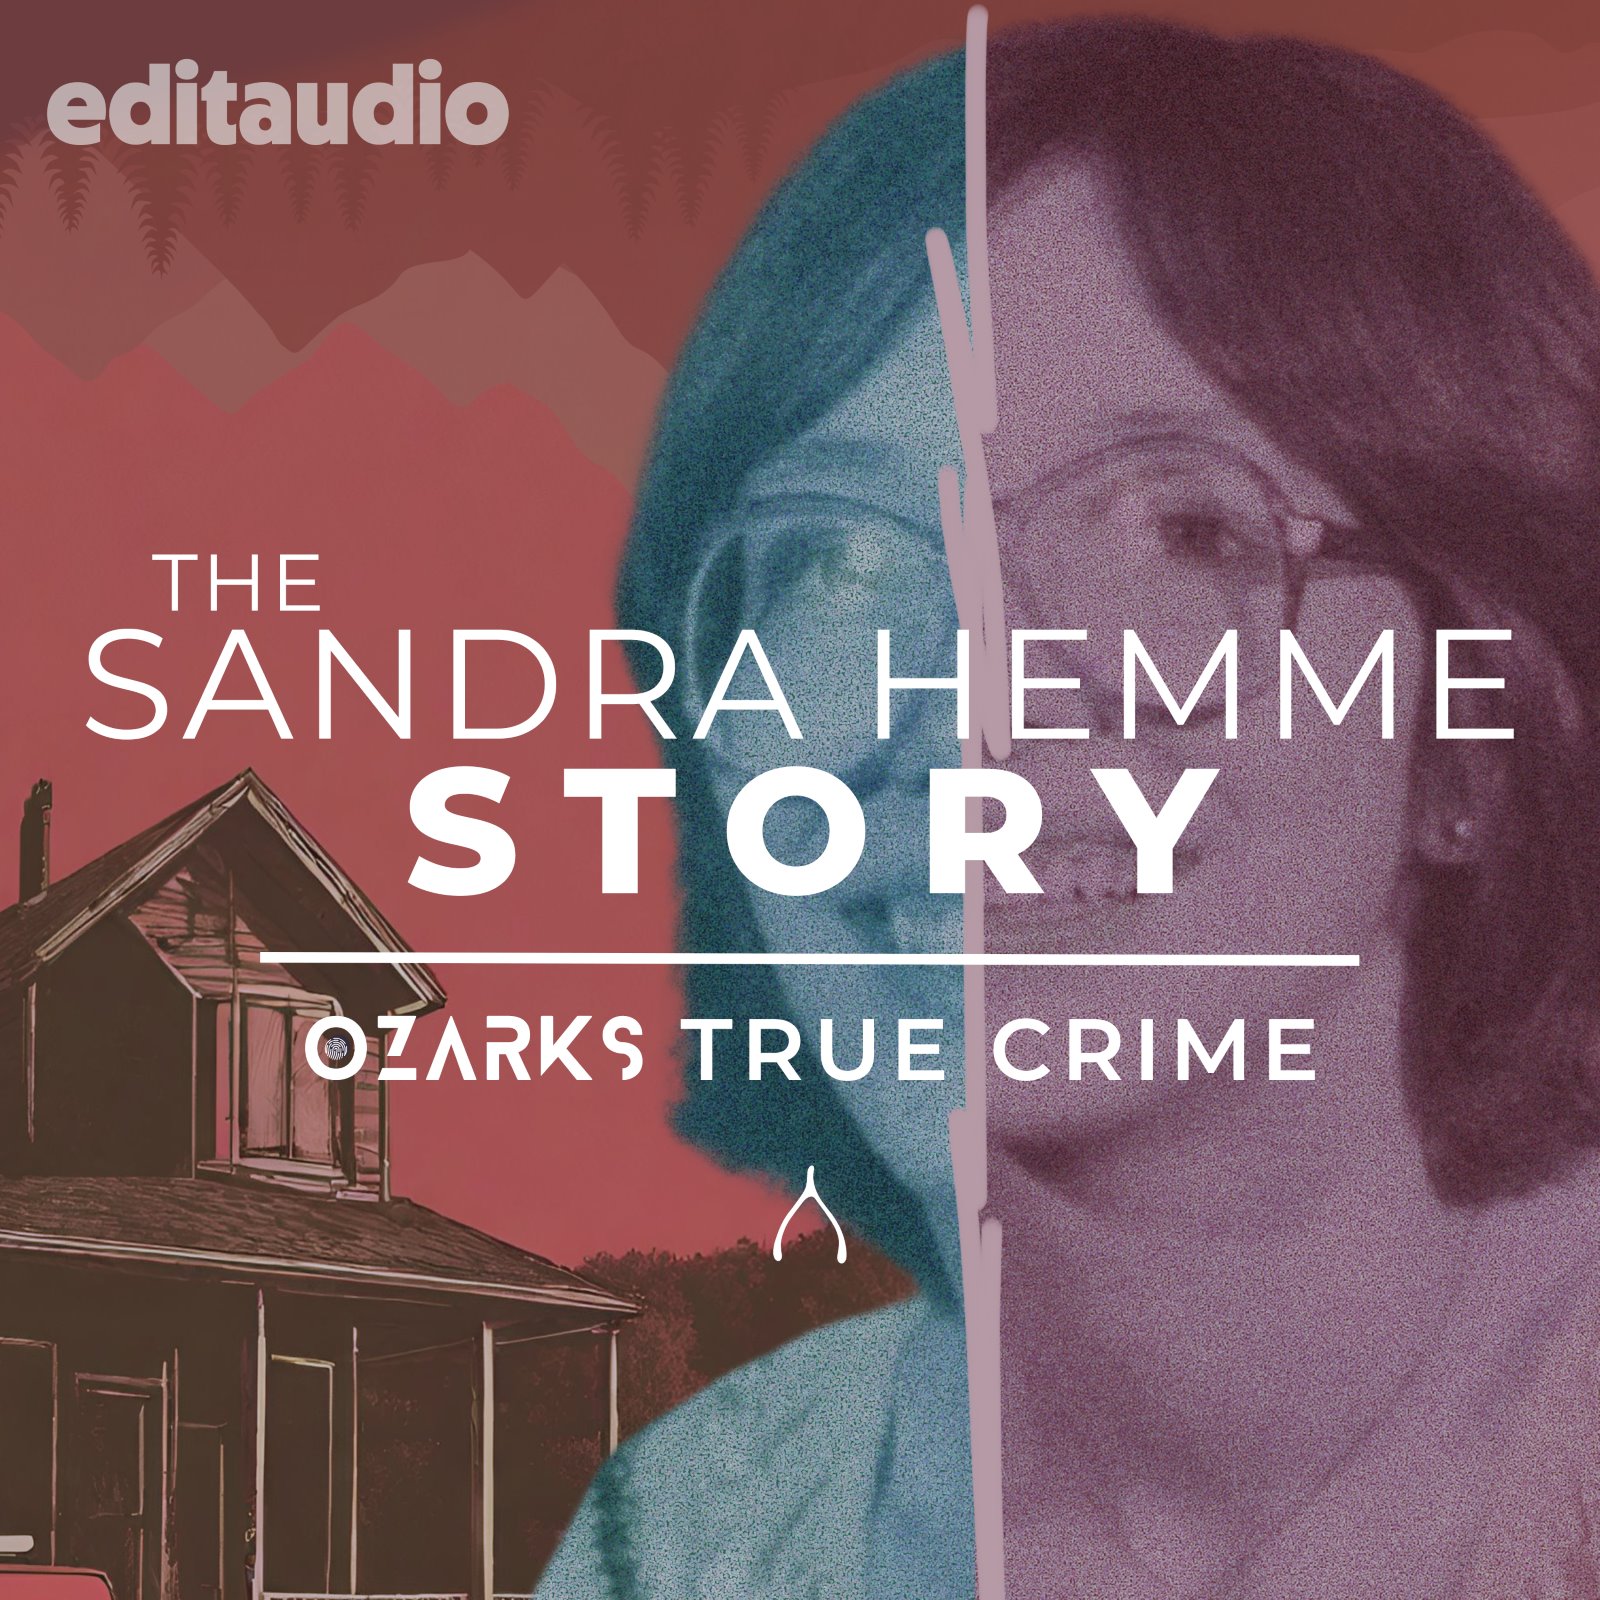 Promotional art for season three of the "Ozarks True Crime" podcast. A picture of Sandra Hemme with the text "The Sandra Hemme Story" printed over it.